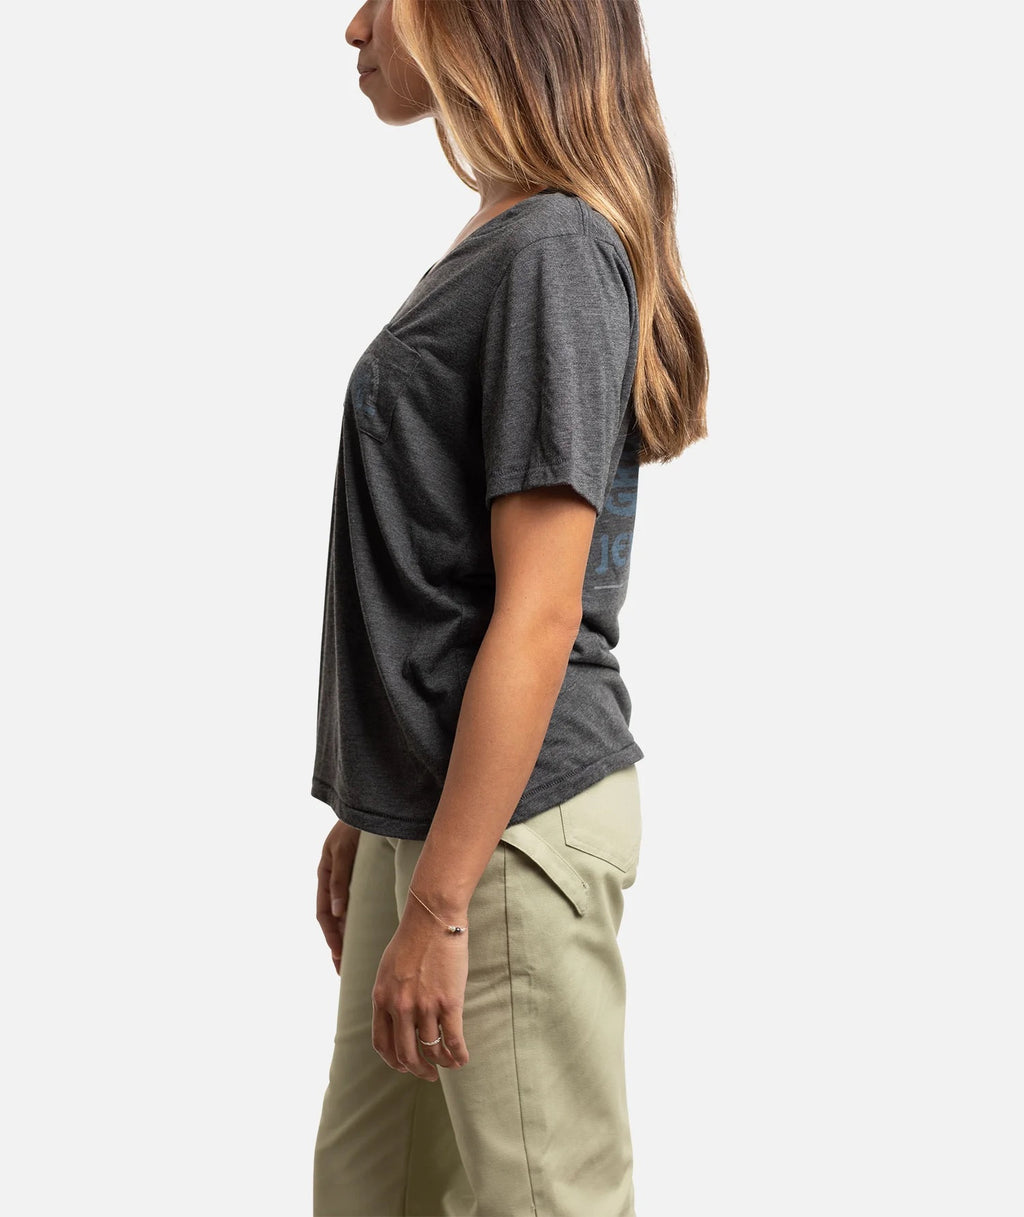 JETTY ROOTS POCKET TEE - CHR